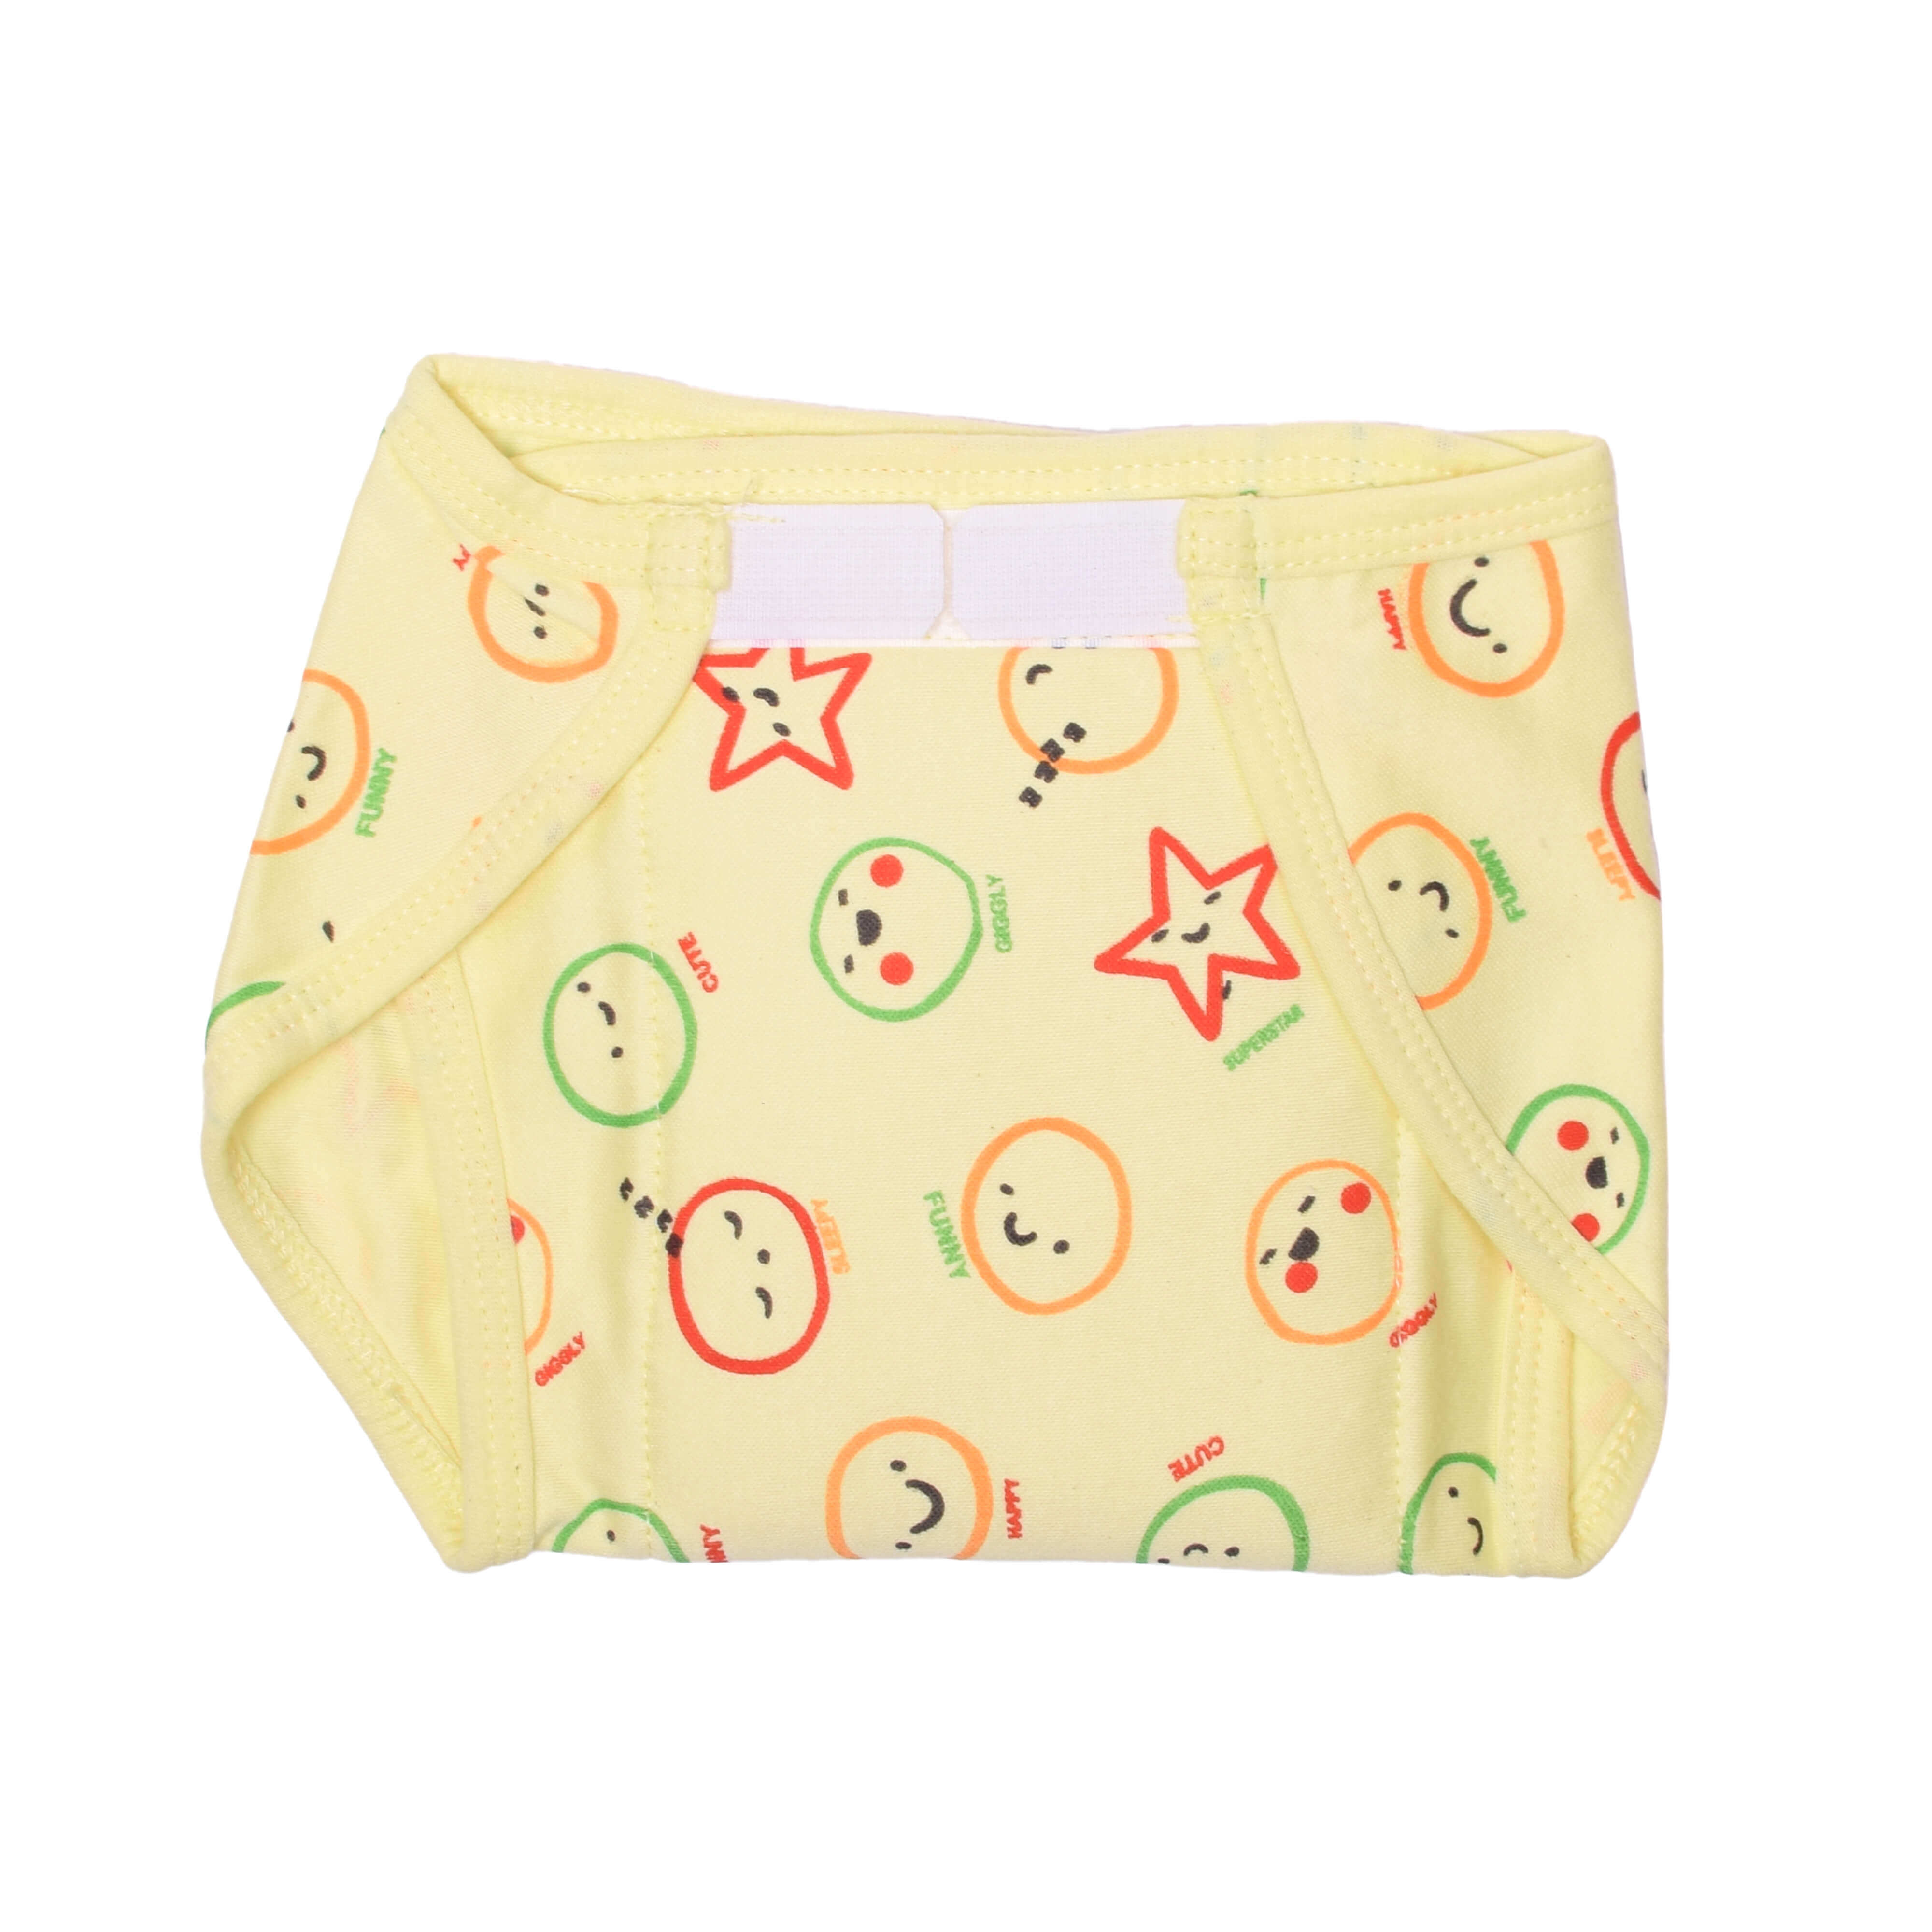 Care Washable Diapers Hosiery Velcro Emoji Print Blue, Yellow & Pink 3P Set (S)